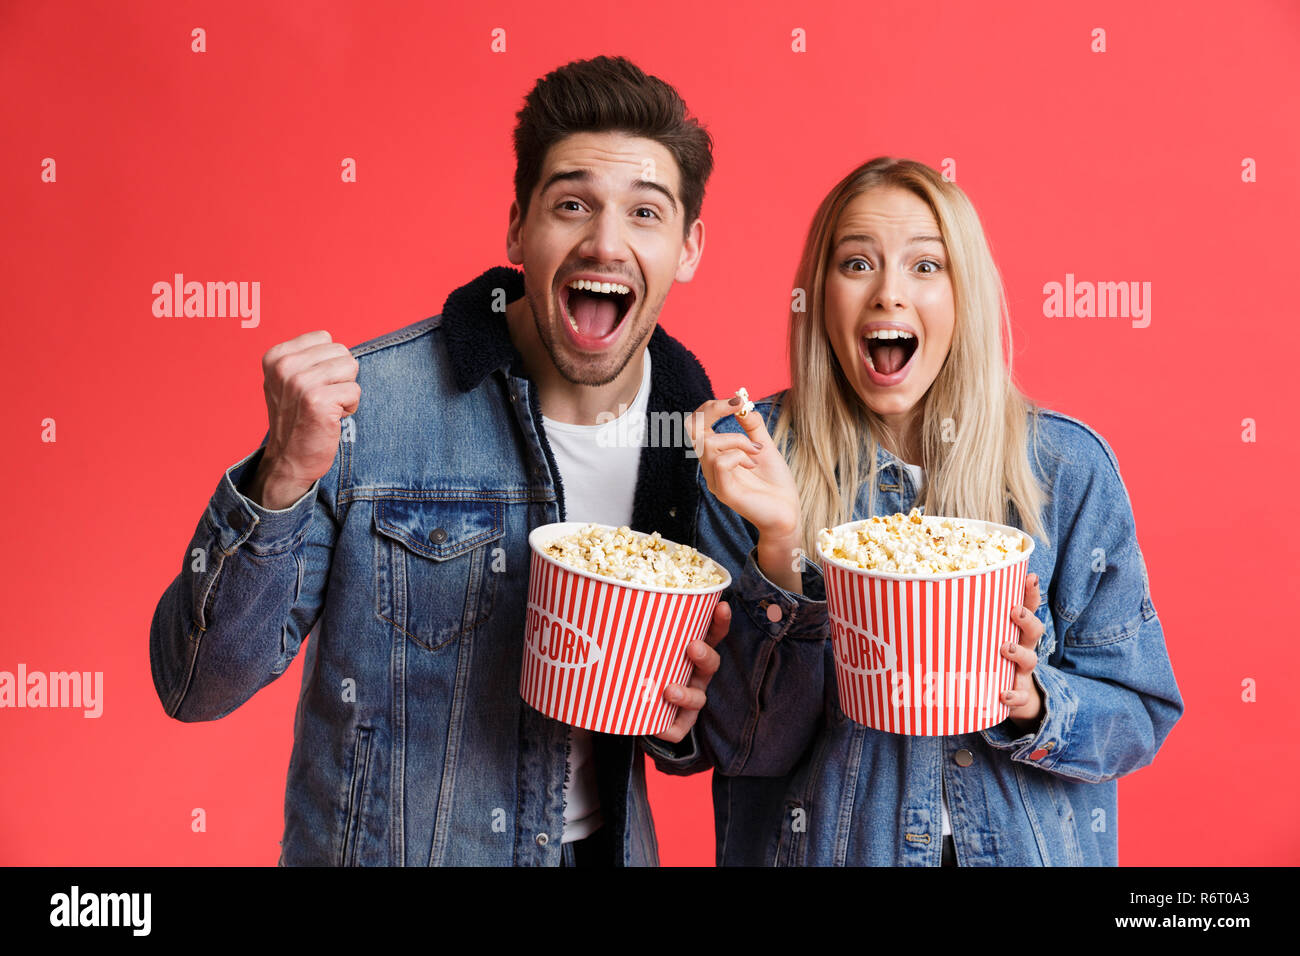 Portrait of an excited young couple dressed in denim jackets standing together isolated over red background, watching movie, eating popcorn Stock Photo